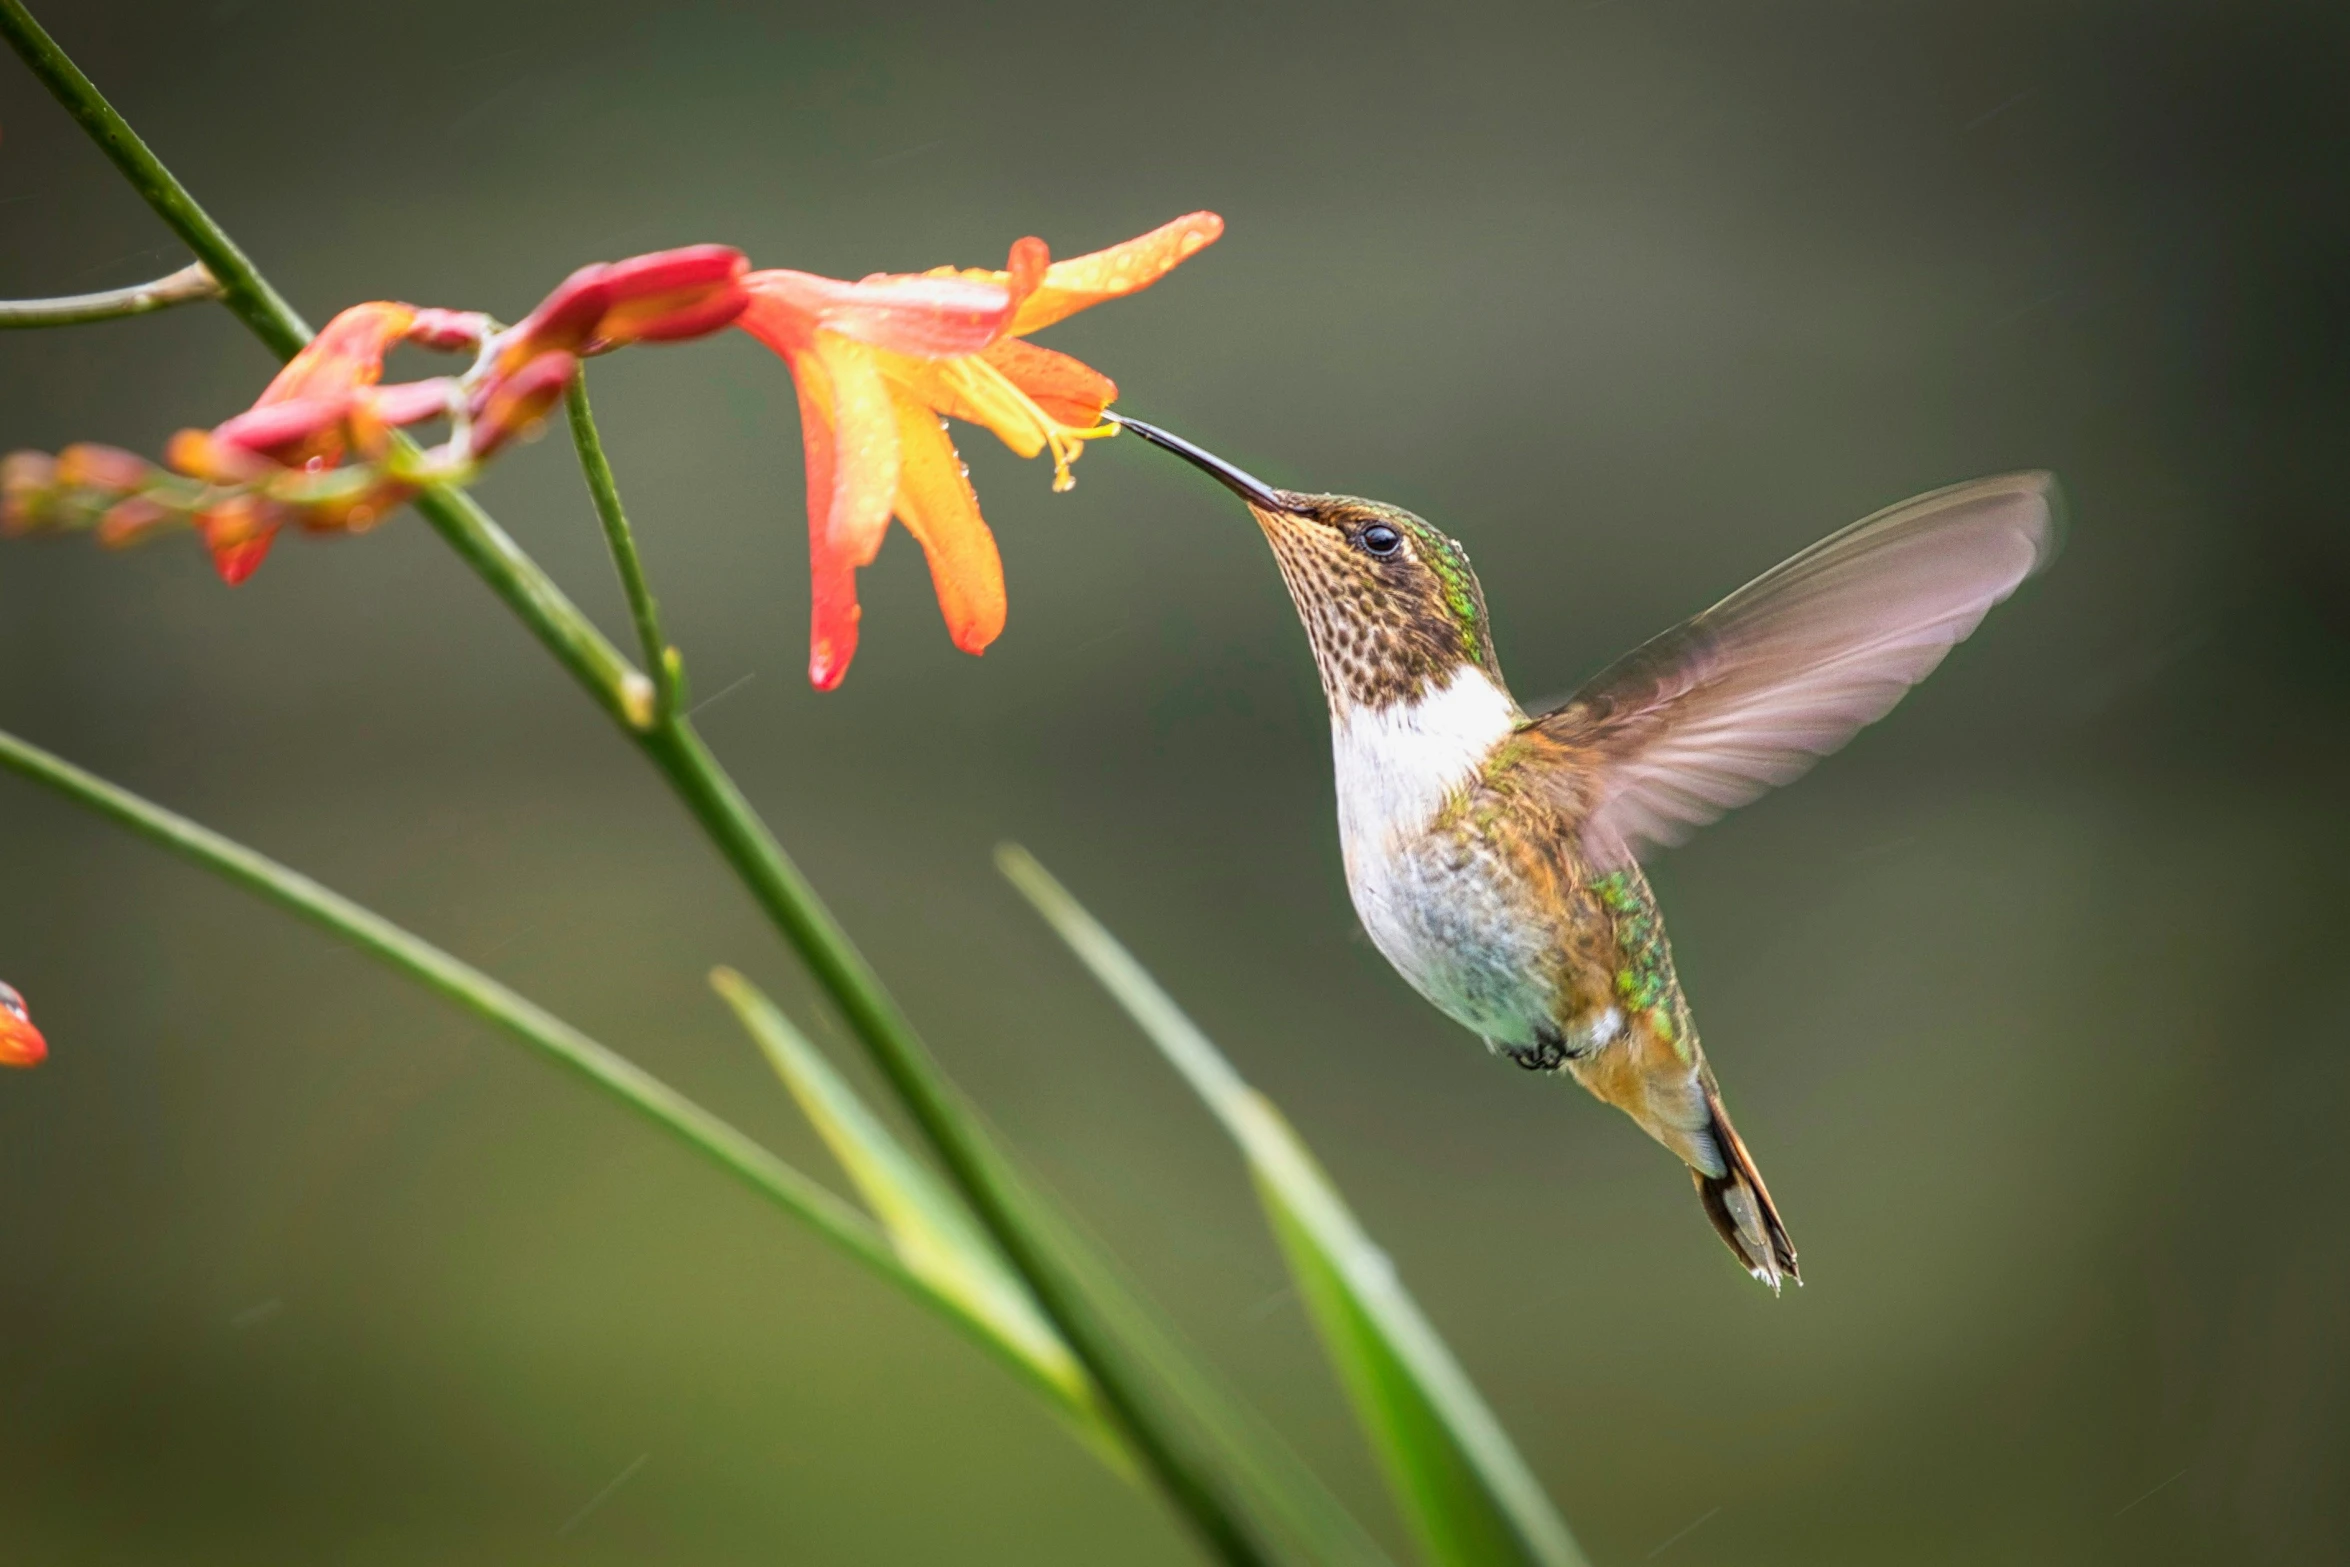 a hummingbird eating from a flower with its wings stretched out